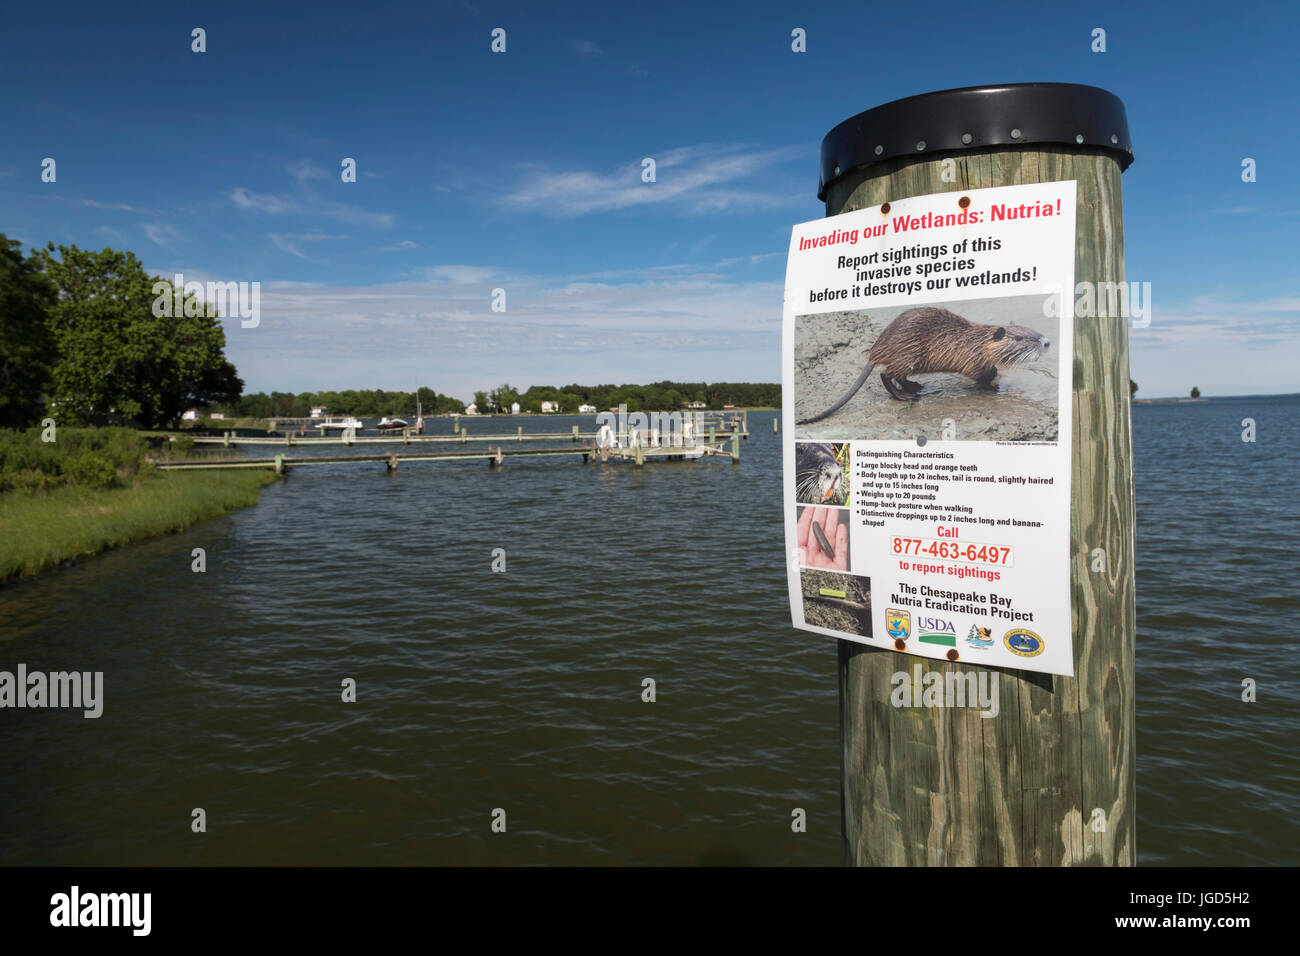 Fairbank, Maryland - A poster at a dock on the Chesapeake Bay asks residents to report signs of the invasive nutria. Stock Photo